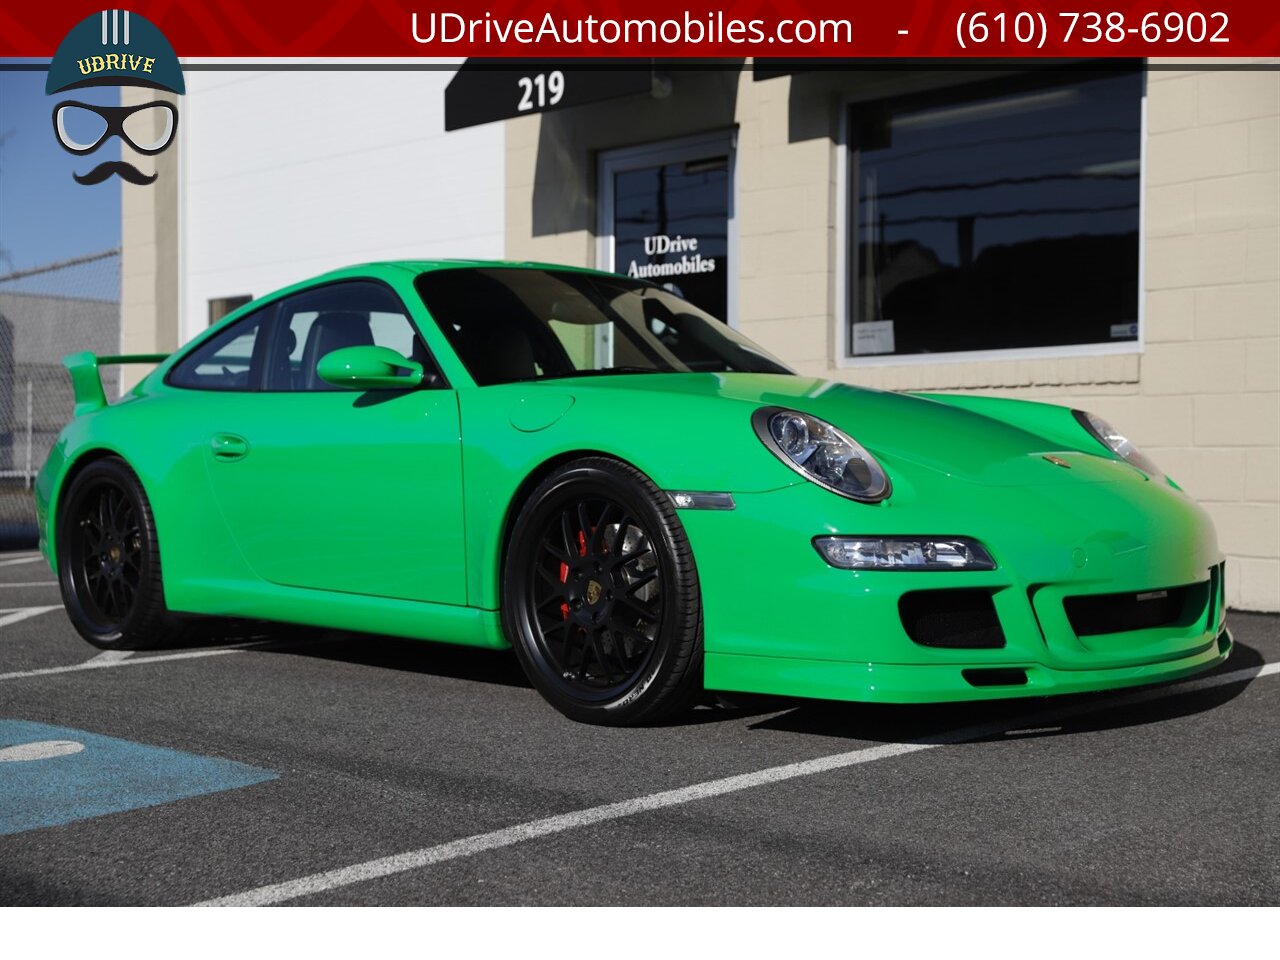 2008 Porsche 911 S 997 6Sp PTS RS Green AeroKit 1of a Kind  $118k MSRP Champion F77 Pkg RG5 Whls - Photo 16 - West Chester, PA 19382